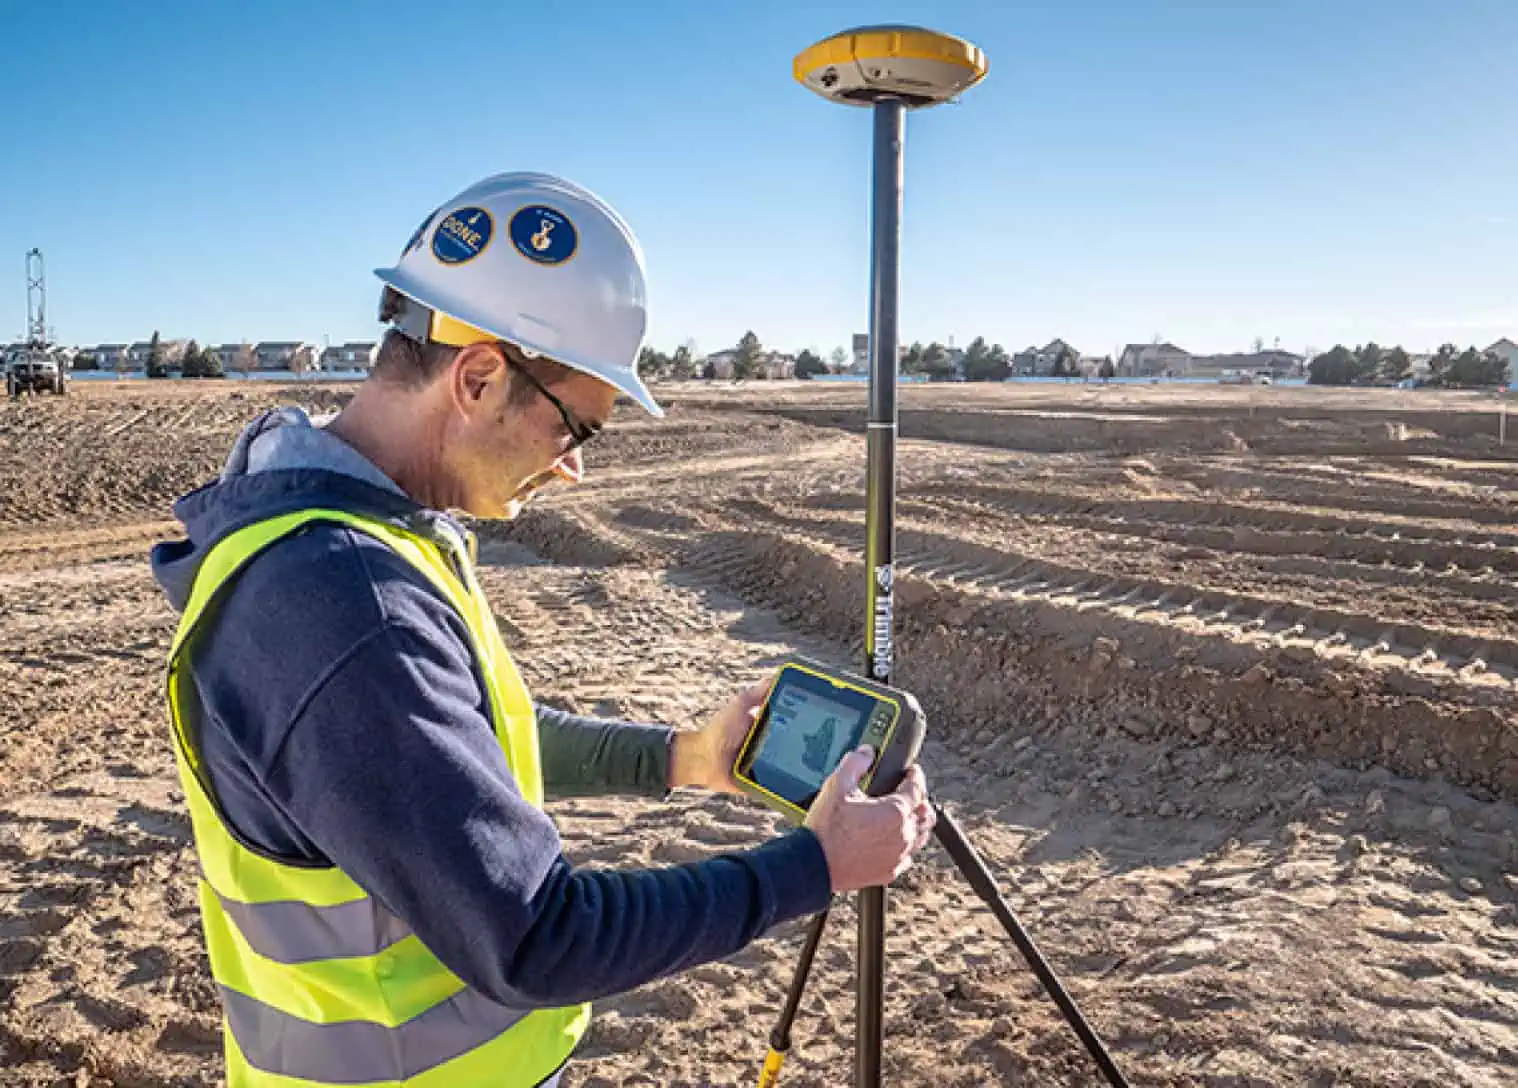 Professional Surveyor Collecting Topographical Data on Construction Site